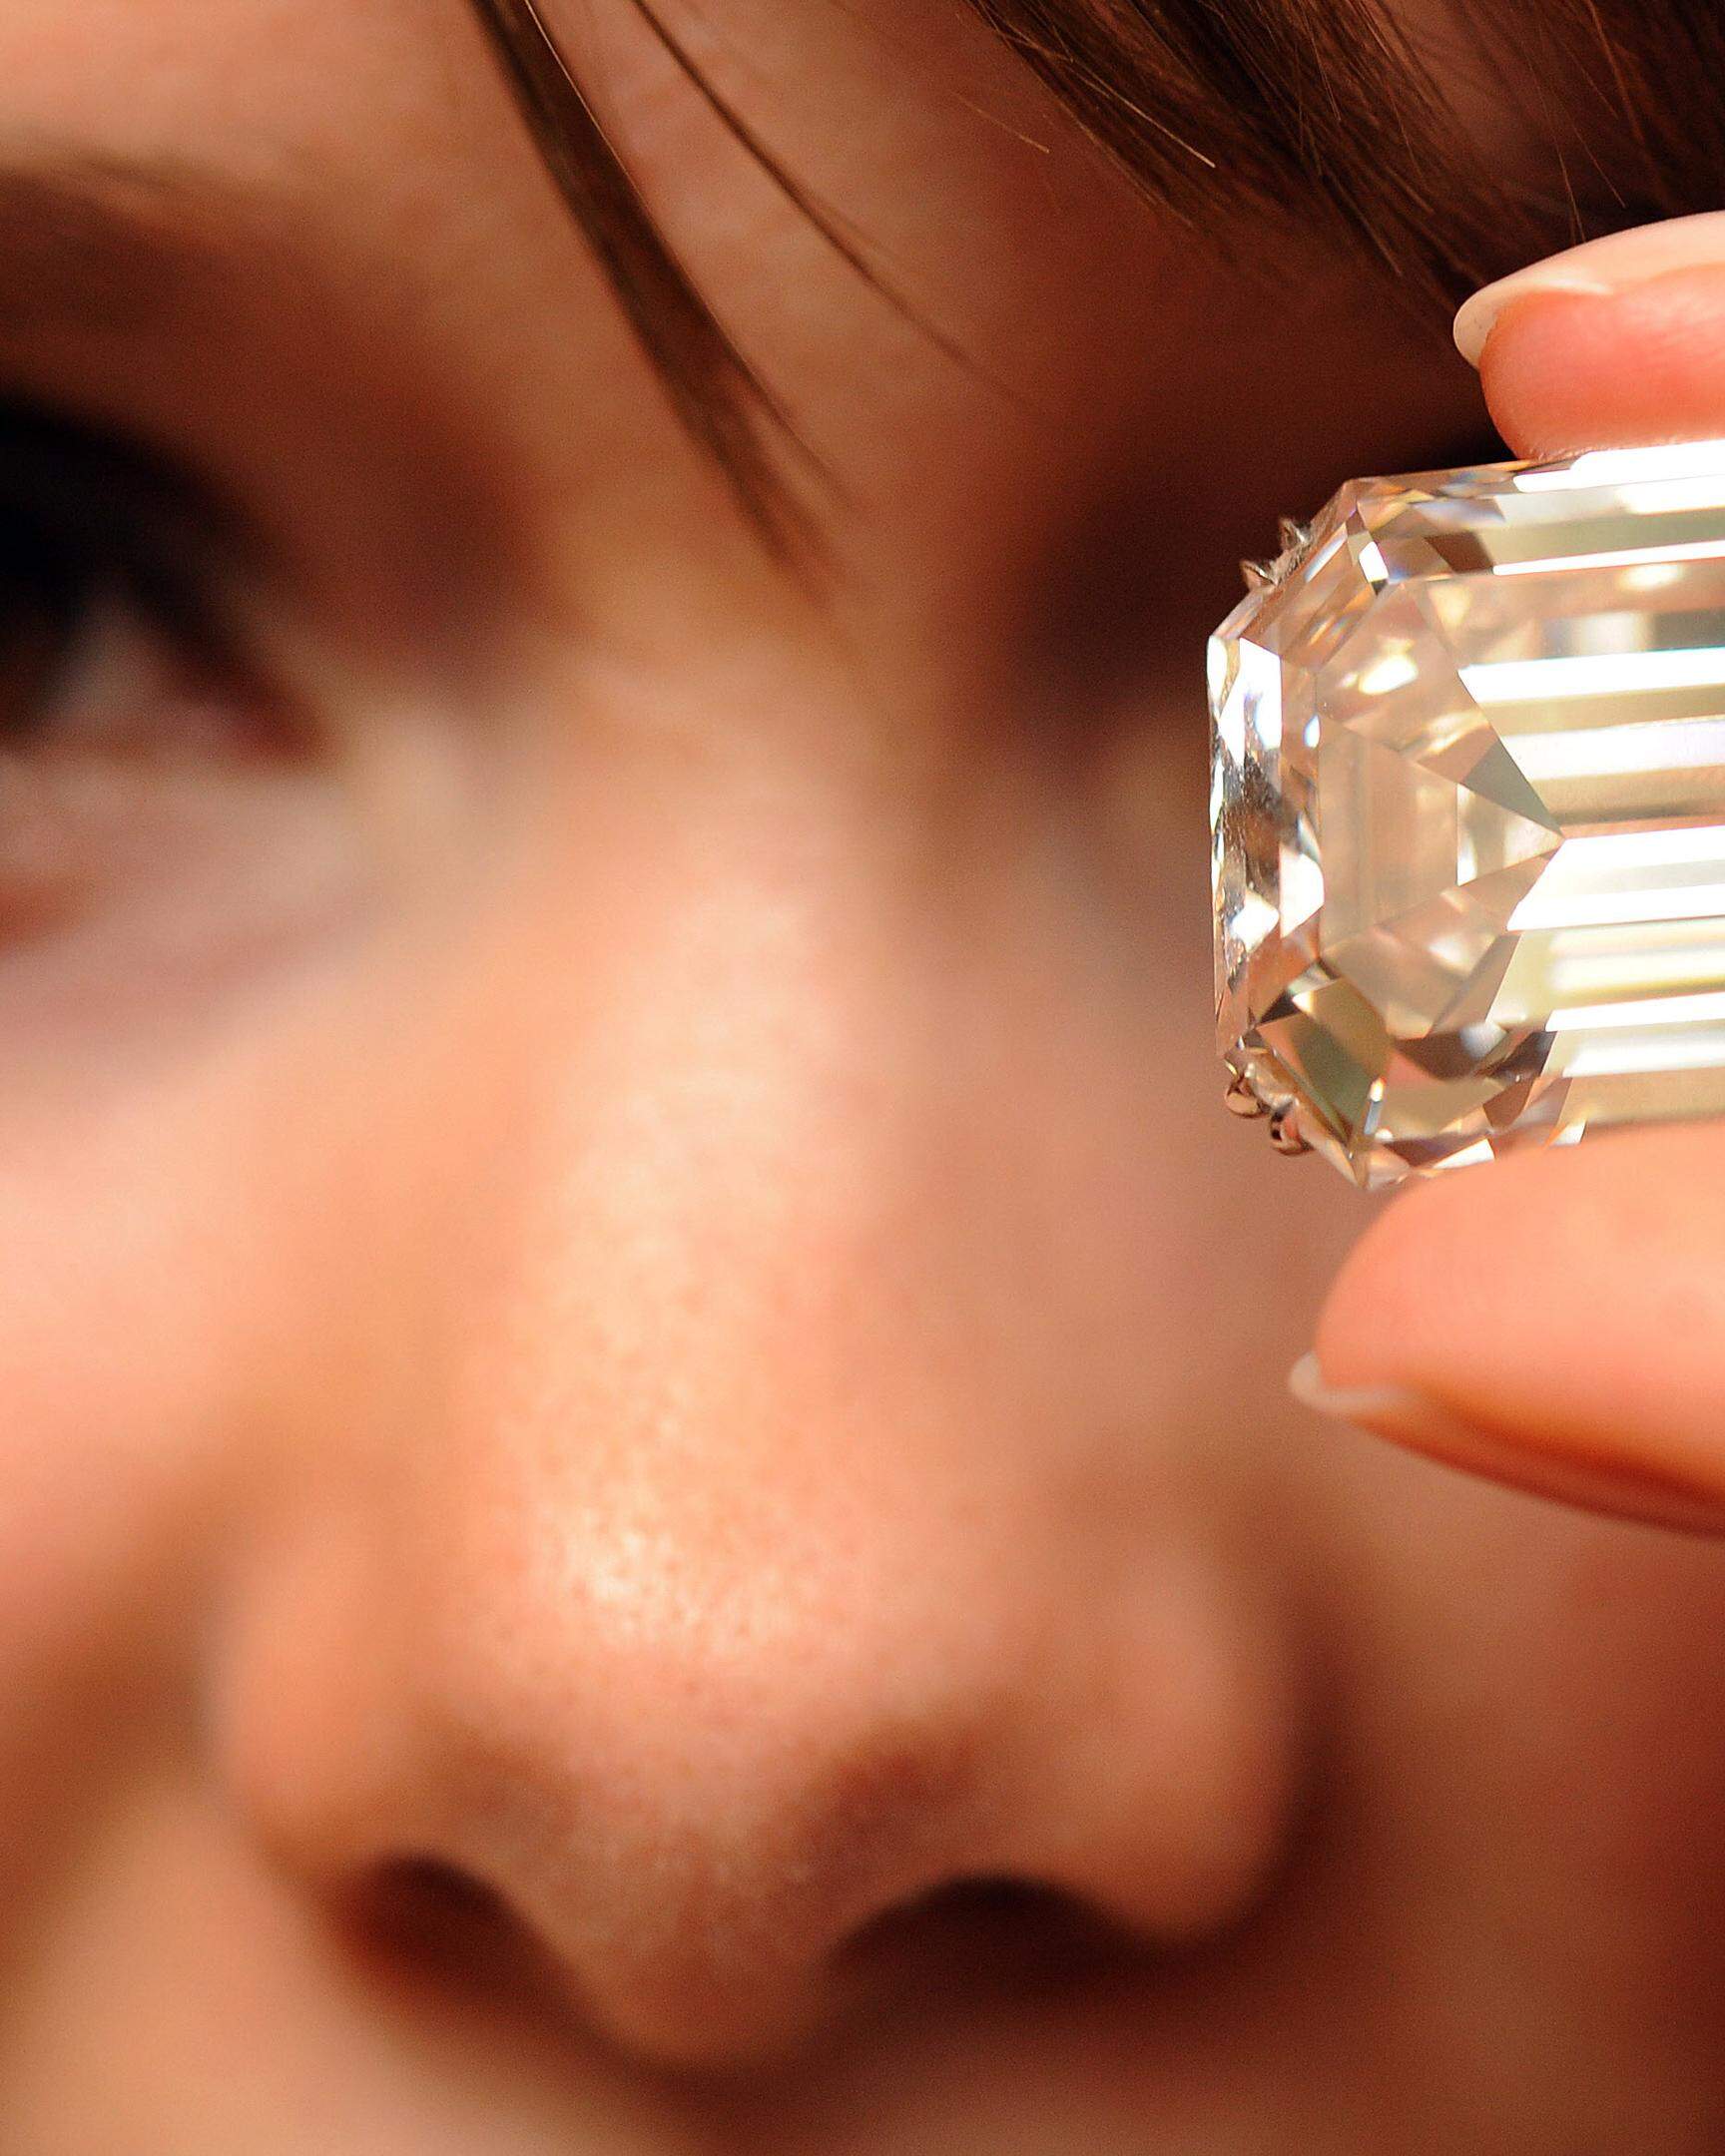 A Sotheby's employee displays a the famous Lesotho I diamond during an auction preview on November 12, 2008 in Geneva. The emeral-cut diamond weighing 71.73 carats was the largest to be cut from the Lesotho, a spectacular rough of diamond of 601 carats in its entirety discovered in 1967. The diamond appearing at auction for the first time is expected to reach USD 3 to 5 millions during a sale on "Magnificent and Extremely Rare Diamonds" in Geneva on next November 19, 2008. AFP PHOTO / FABRICE COFFRINI